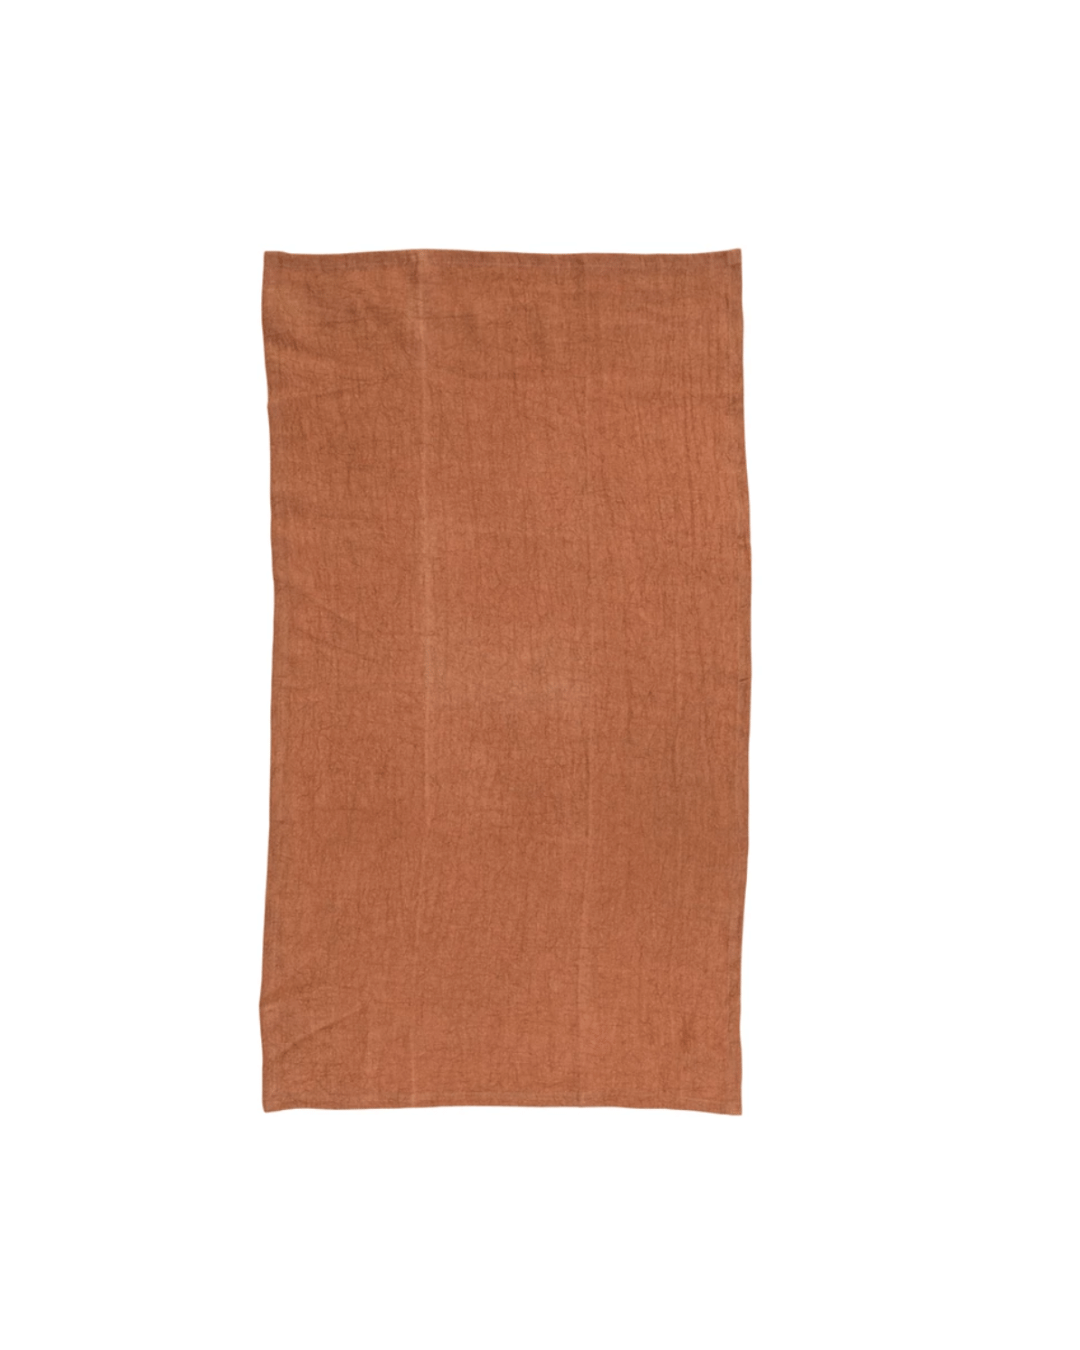 A plain, rectangular terracotta-colored Linen Tea Towel Rust, neatly folded and reminiscent of a Scottsdale Arizona style, isolated on a white background by Creative Co-op.